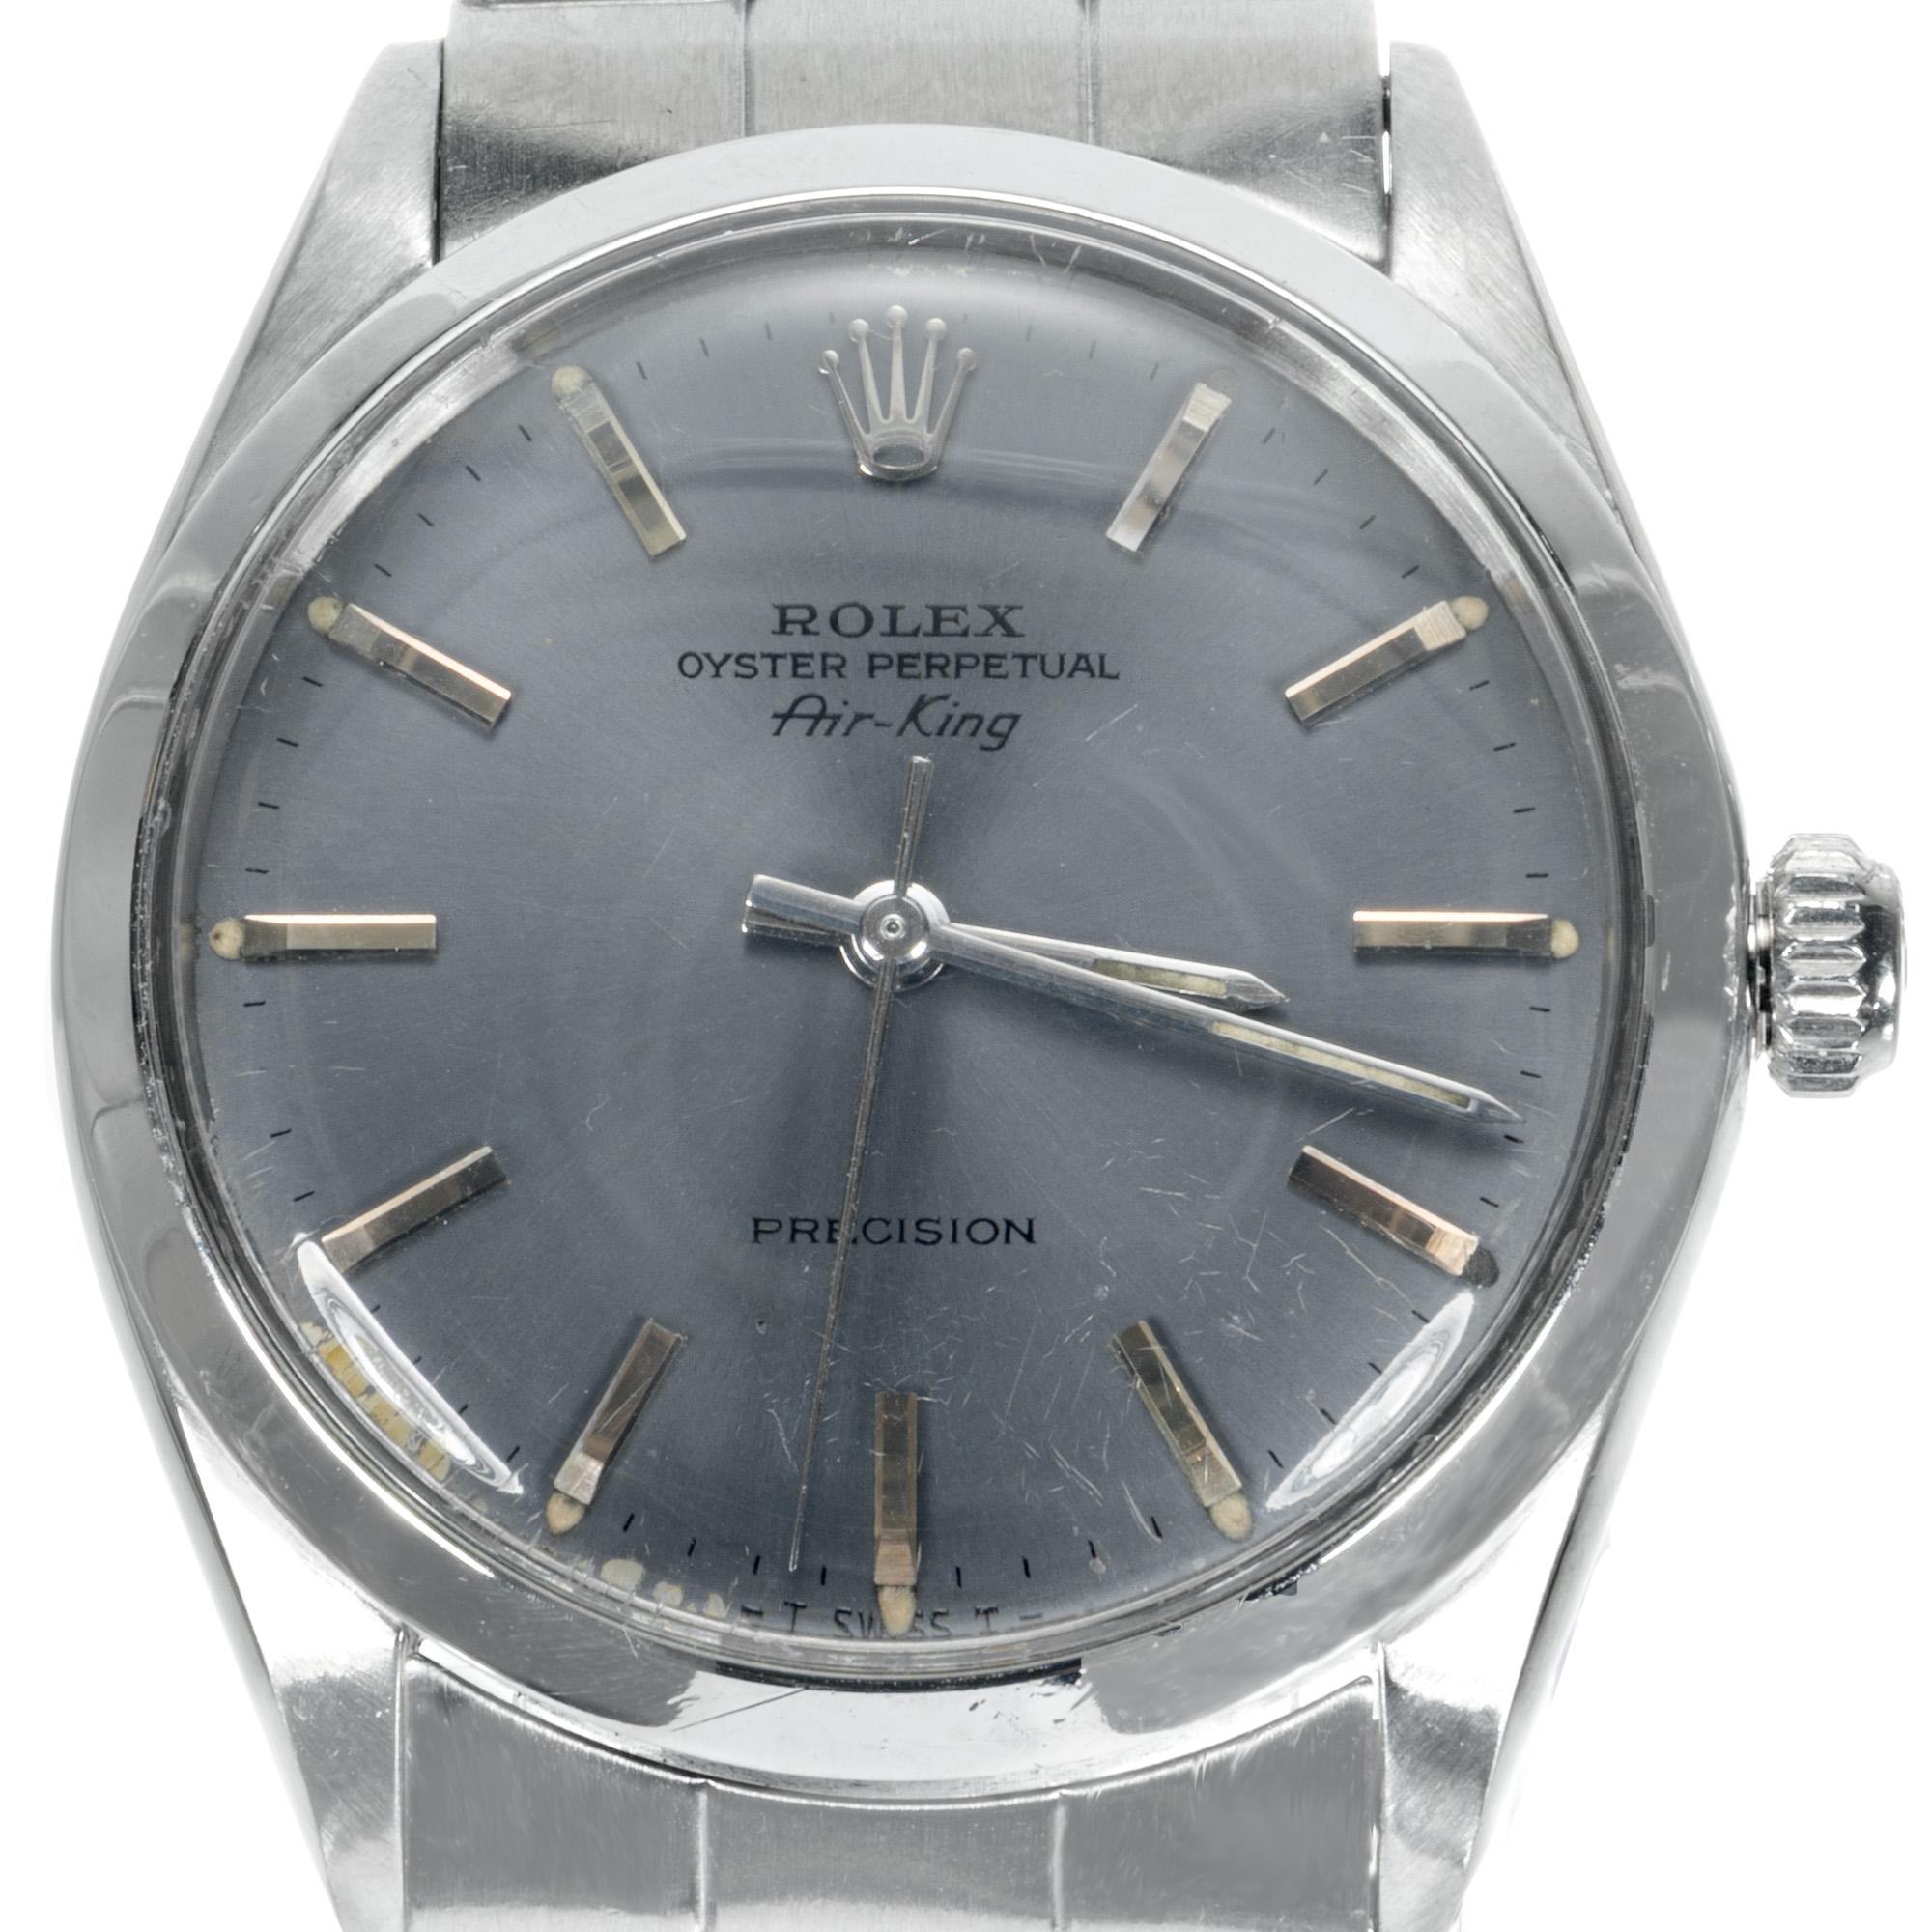 Men's 34mm Rolex air king 5500. Stainless steel case and oyster band. Circa 1966. 7.75 inches

Length: 39.80mm
Width: 34mm
Band width at case: 19mm
Case thickness: 11.30mm
Band: riveted oyster stainless steel band
Crystal: acrylic
Dial: gray with